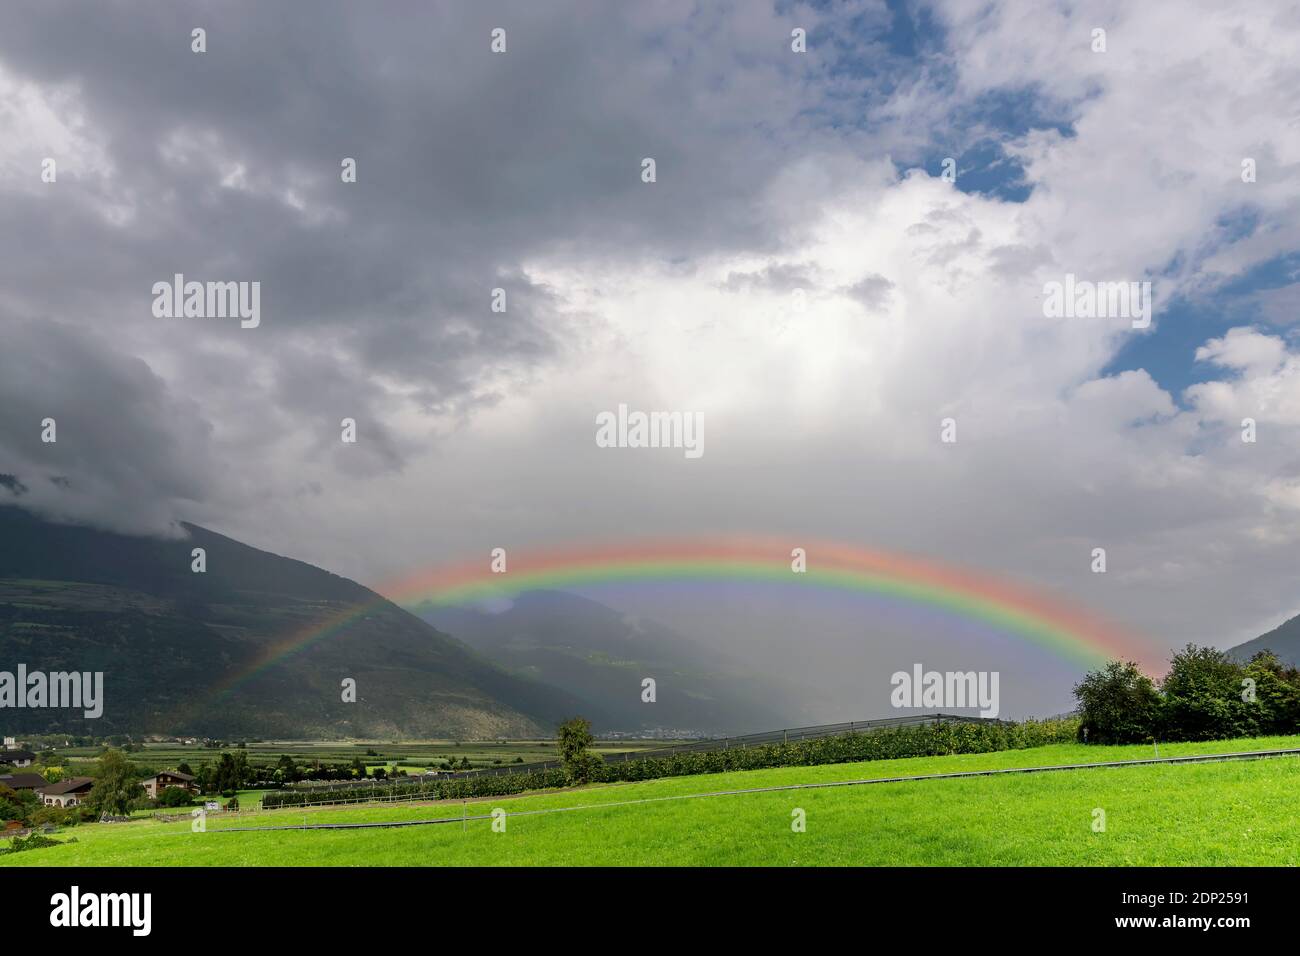 A large rainbow emerges from the clouds over an apple planted field in Val Venosta, Prato allo Stelvio, Italy Stock Photo